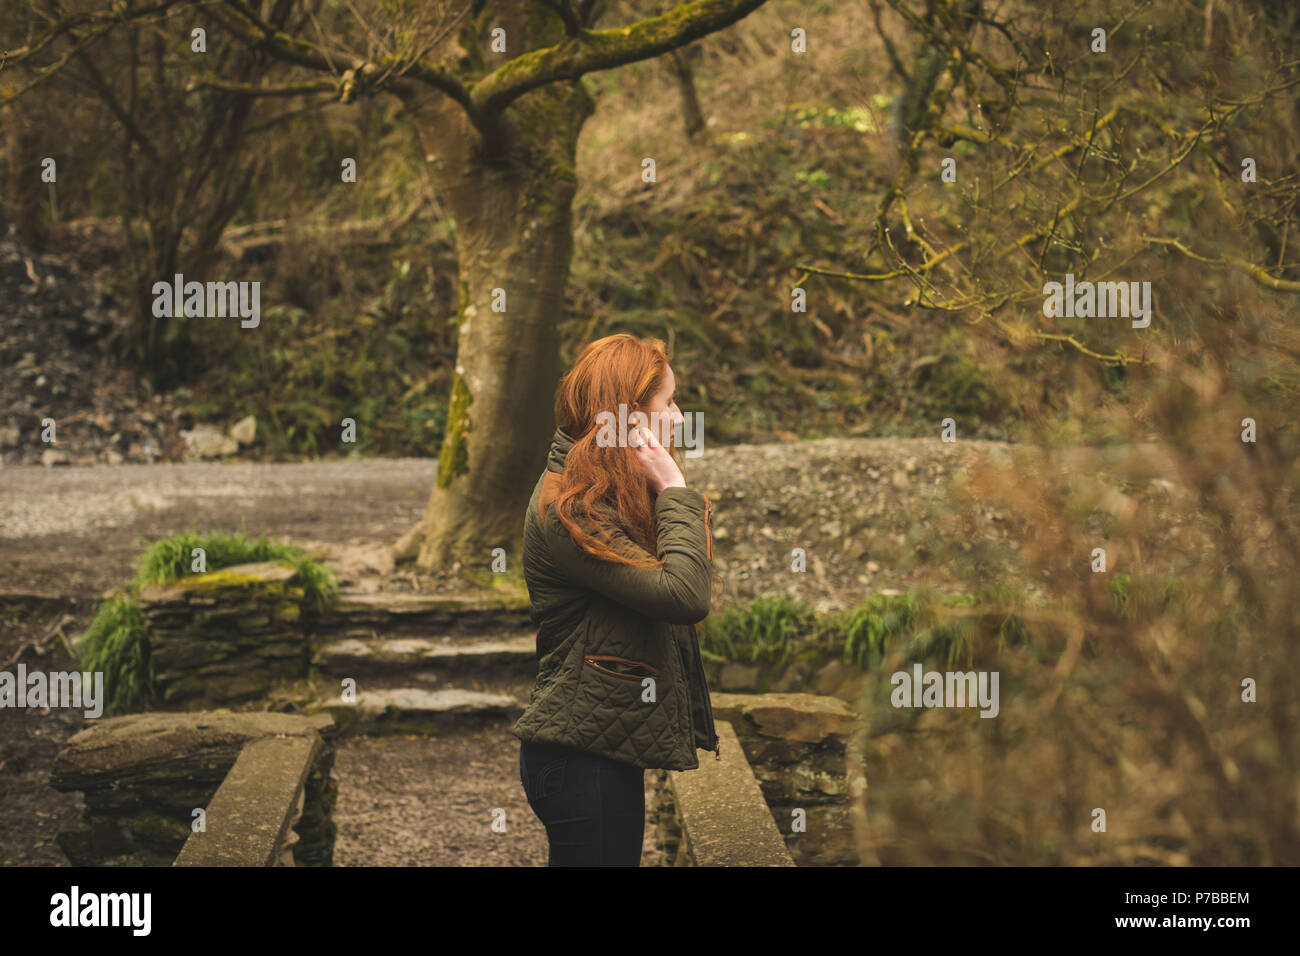 Red hair female hiker looking around in the forest Stock Photo